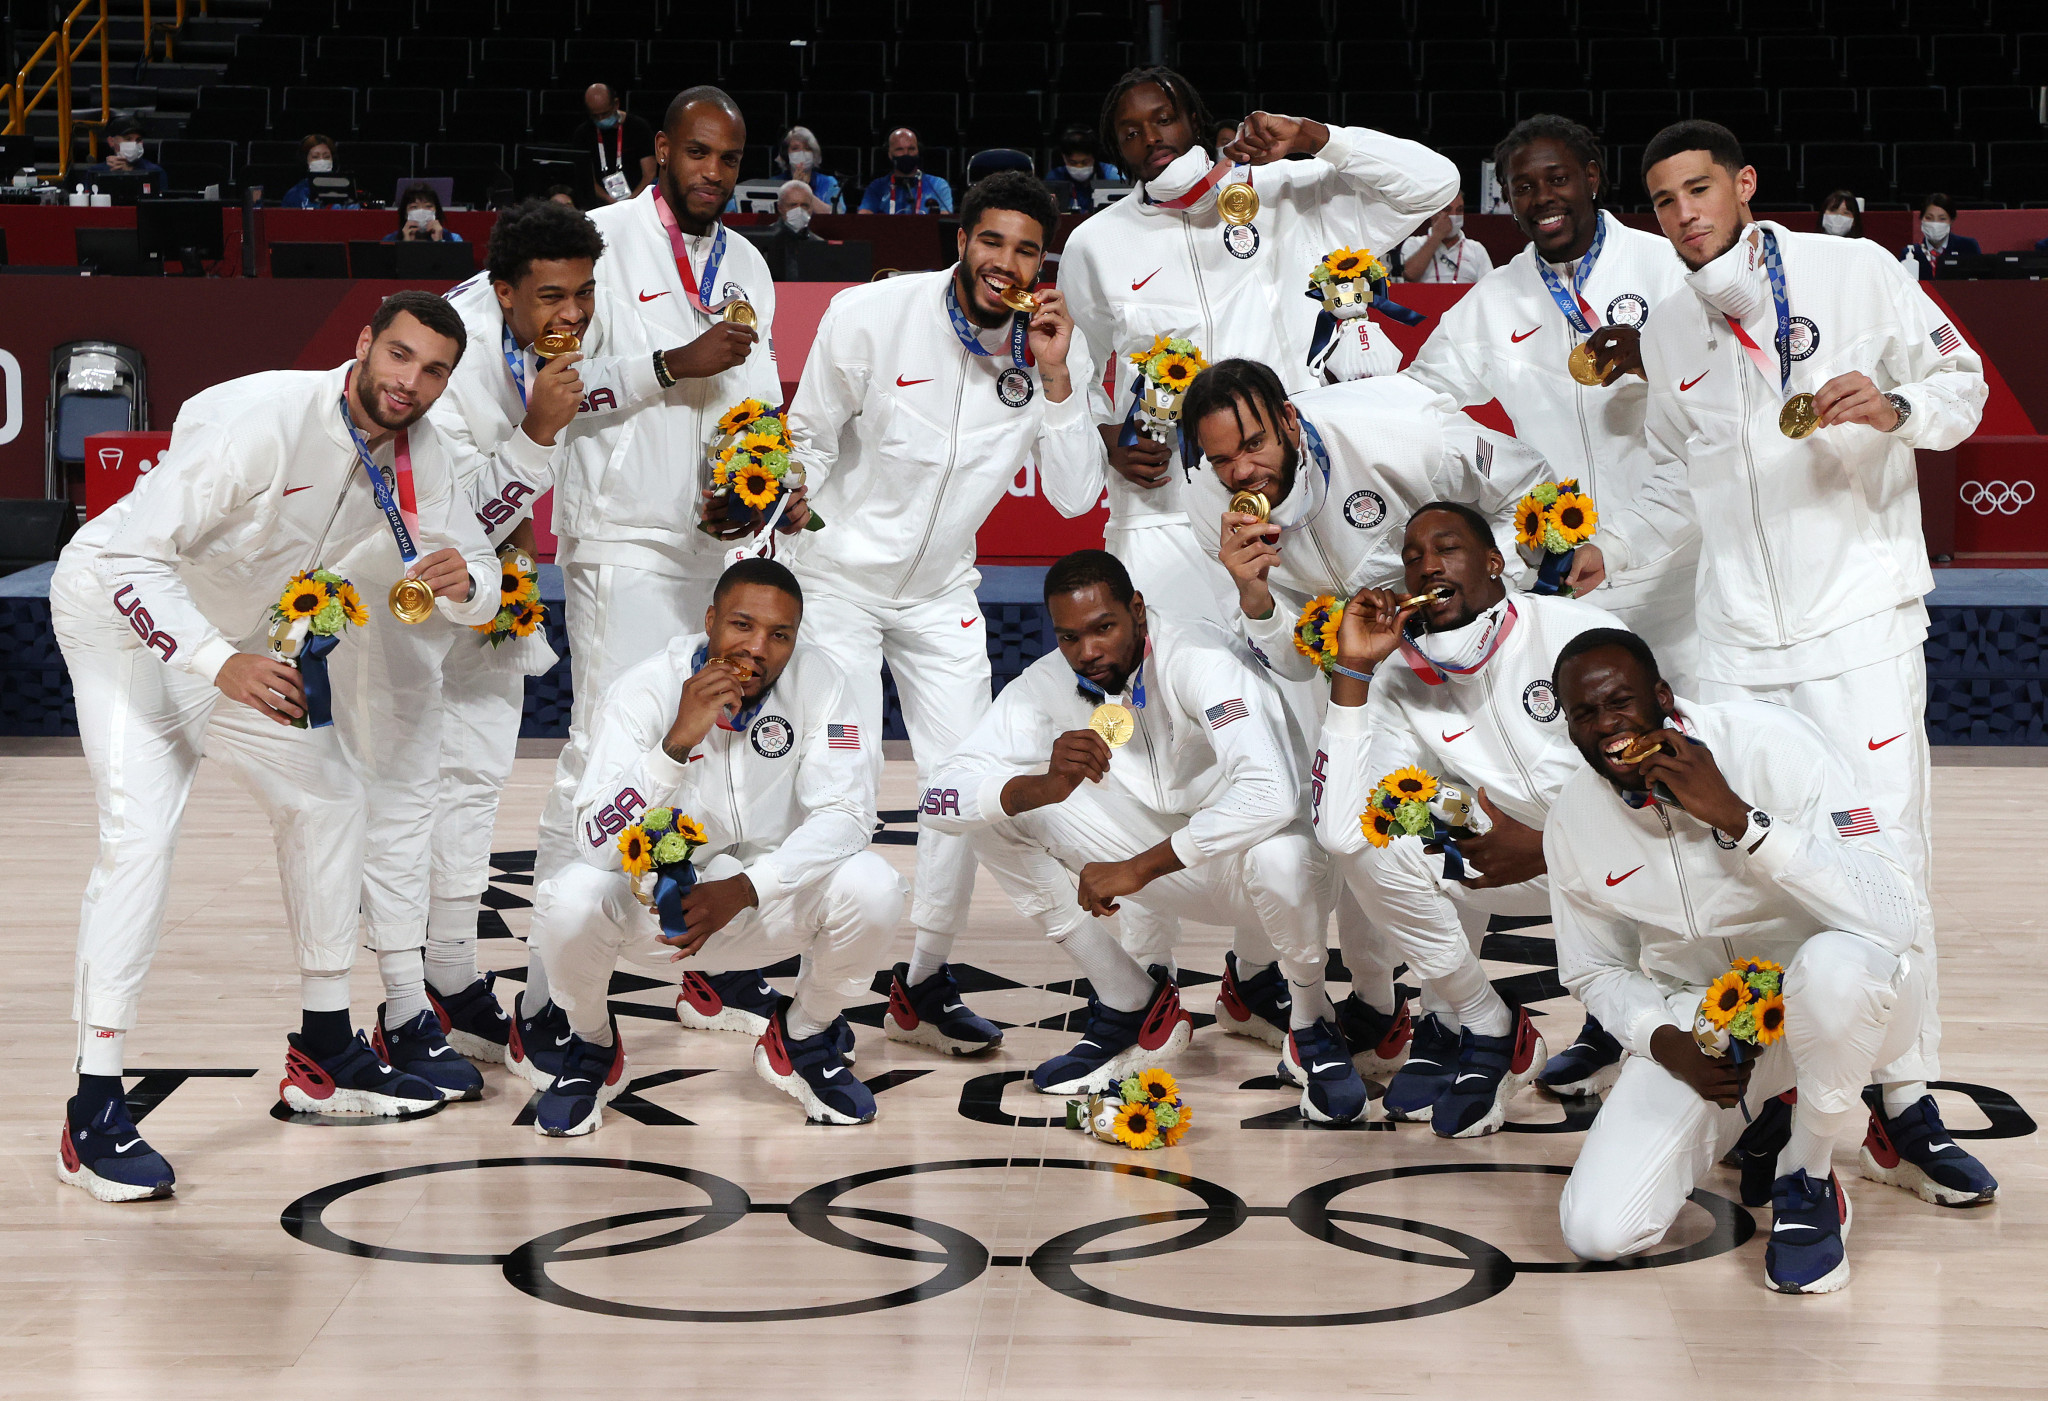 The United States will be chasing a fifth consecutive Olympic men's basketball title at Paris 2024 following their victory at Tokyo 2020